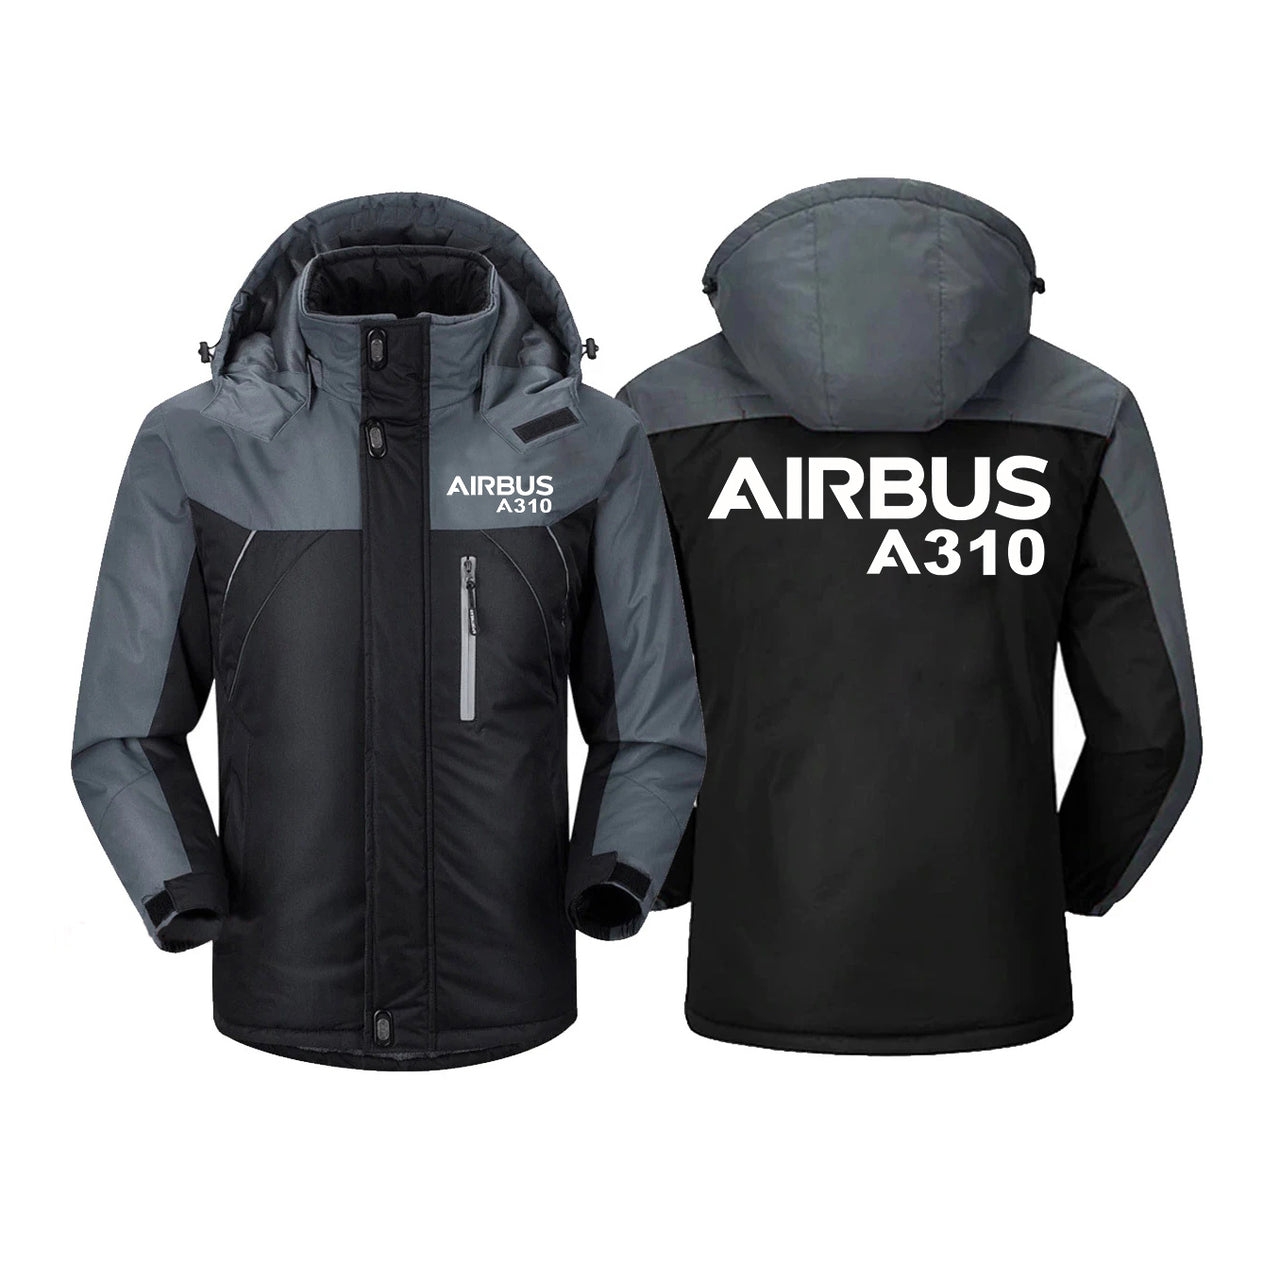 Airbus A310 & Text Designed Thick Winter Jackets